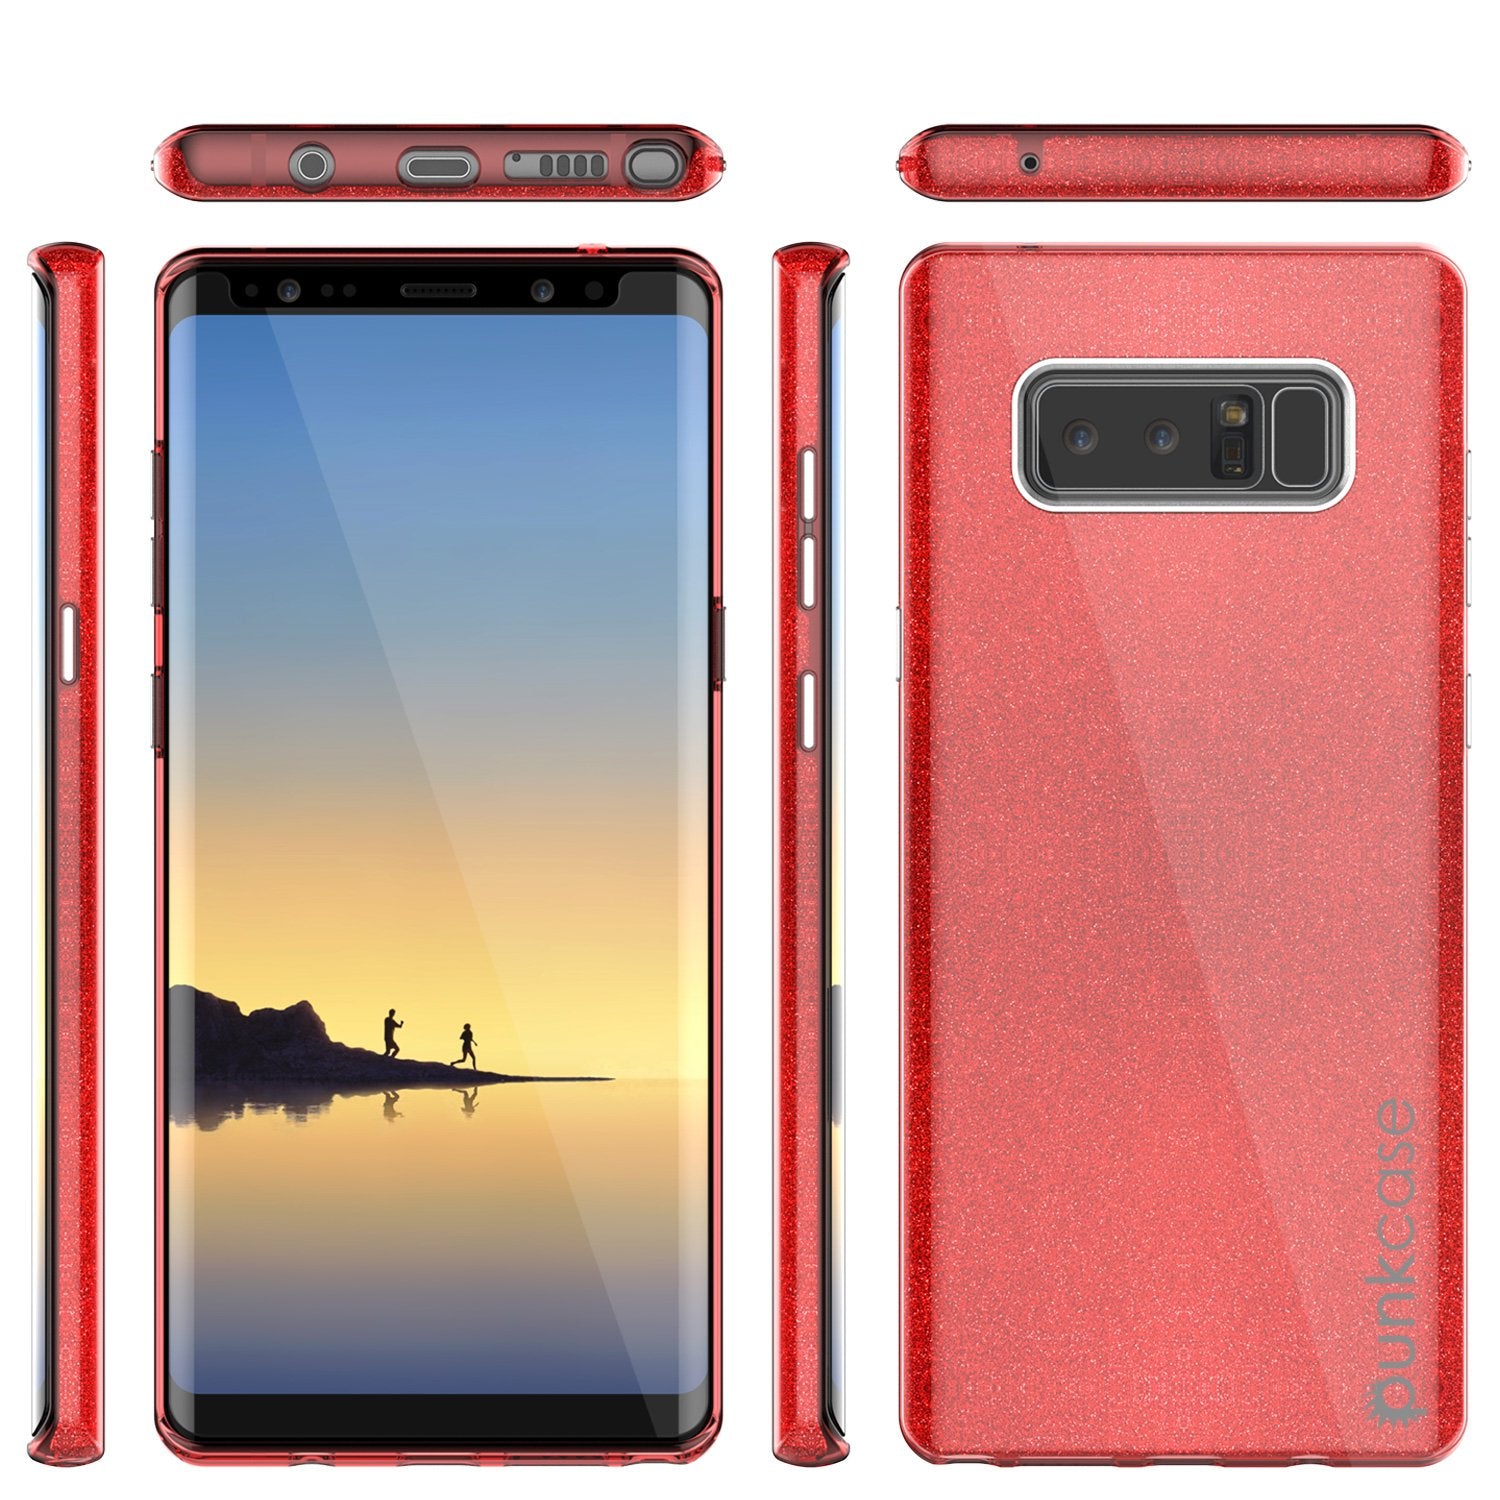 Galaxy Note 8 Case, Punkcase Galactic 2.0 Series Ultra Slim Protective Armor [Red] - PunkCase NZ